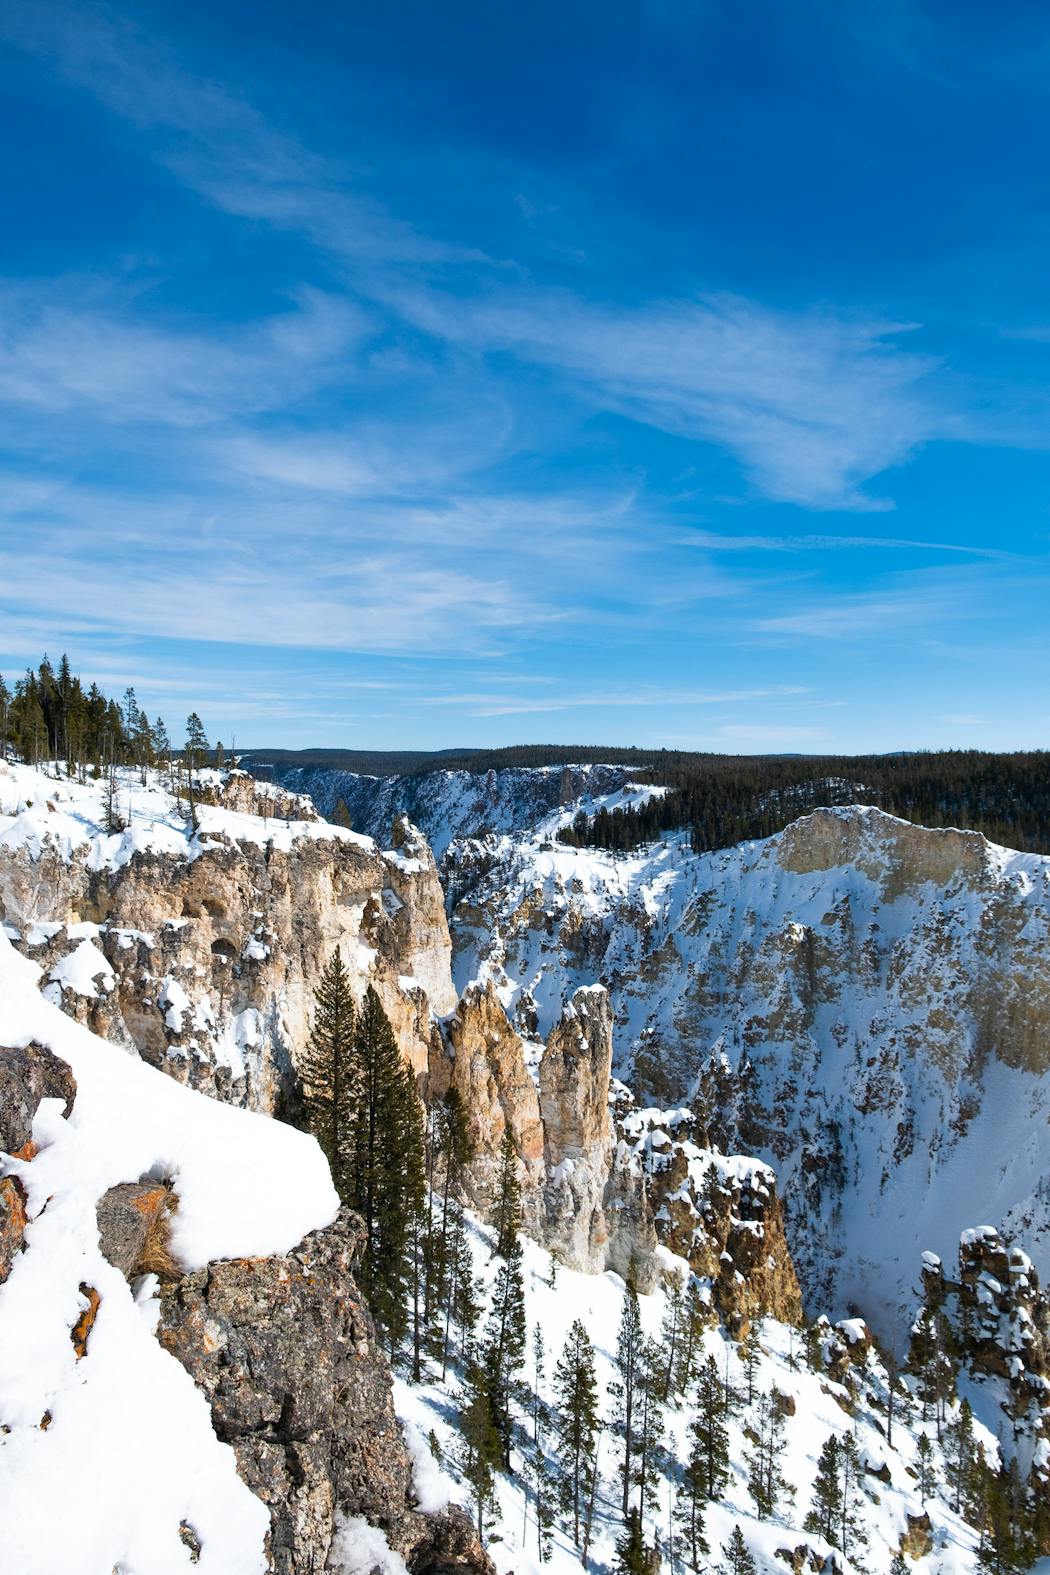 The Grand Canyon of Yellowstone. 